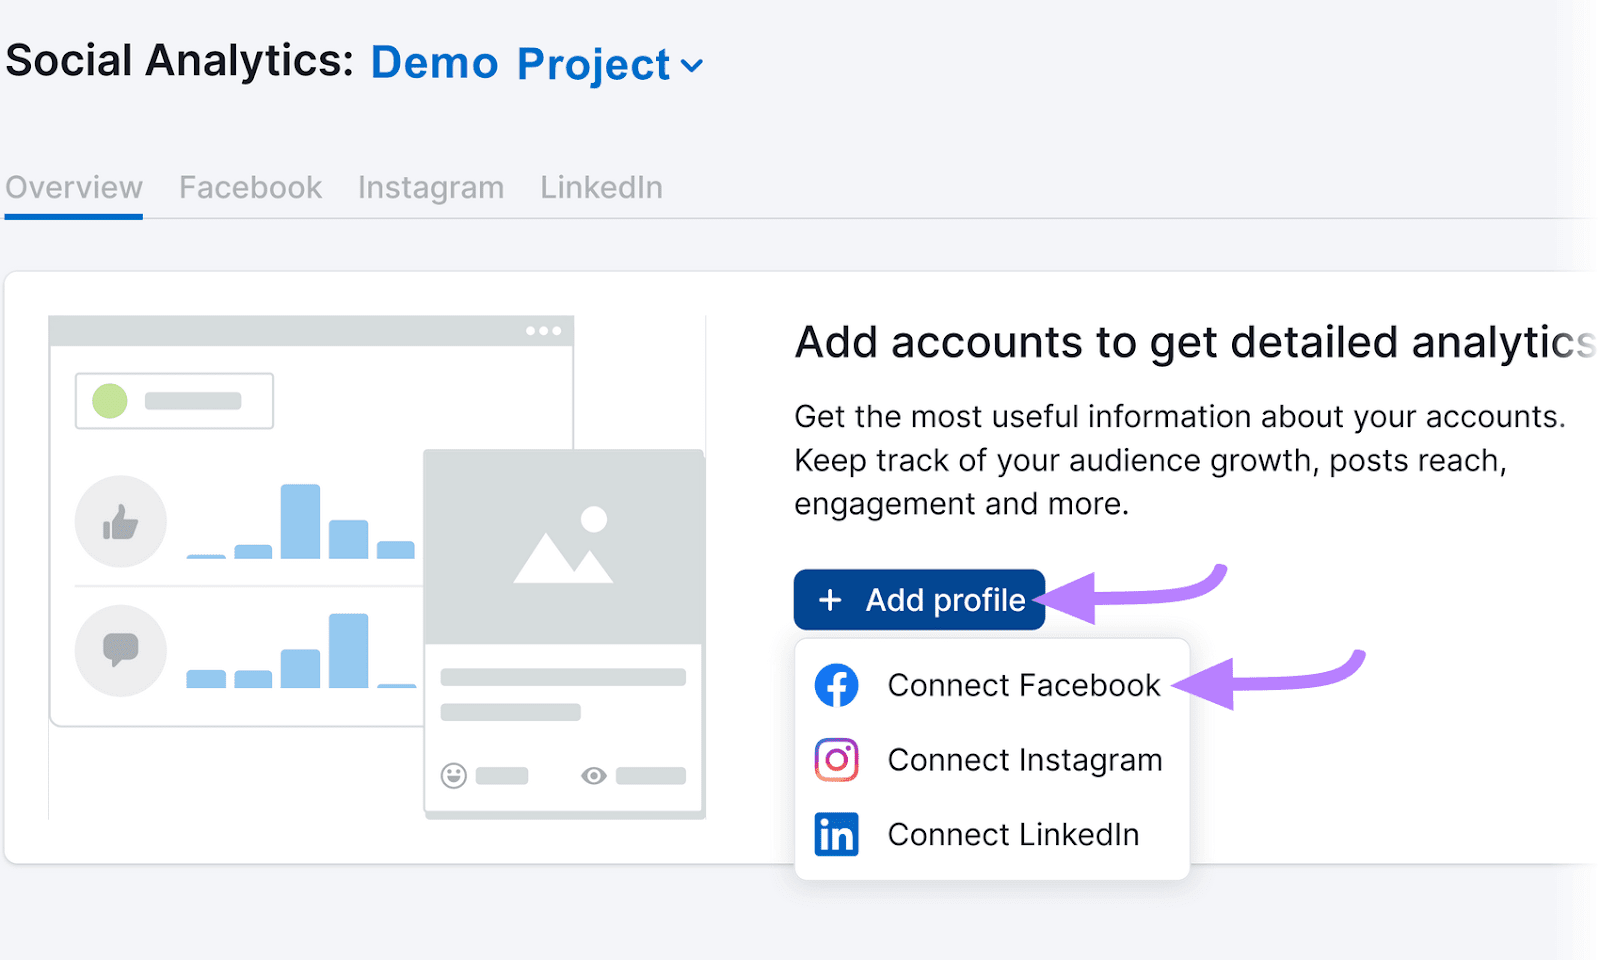 “Connect Facebook" button selected under "Add profile" drop-down in Social Analytics